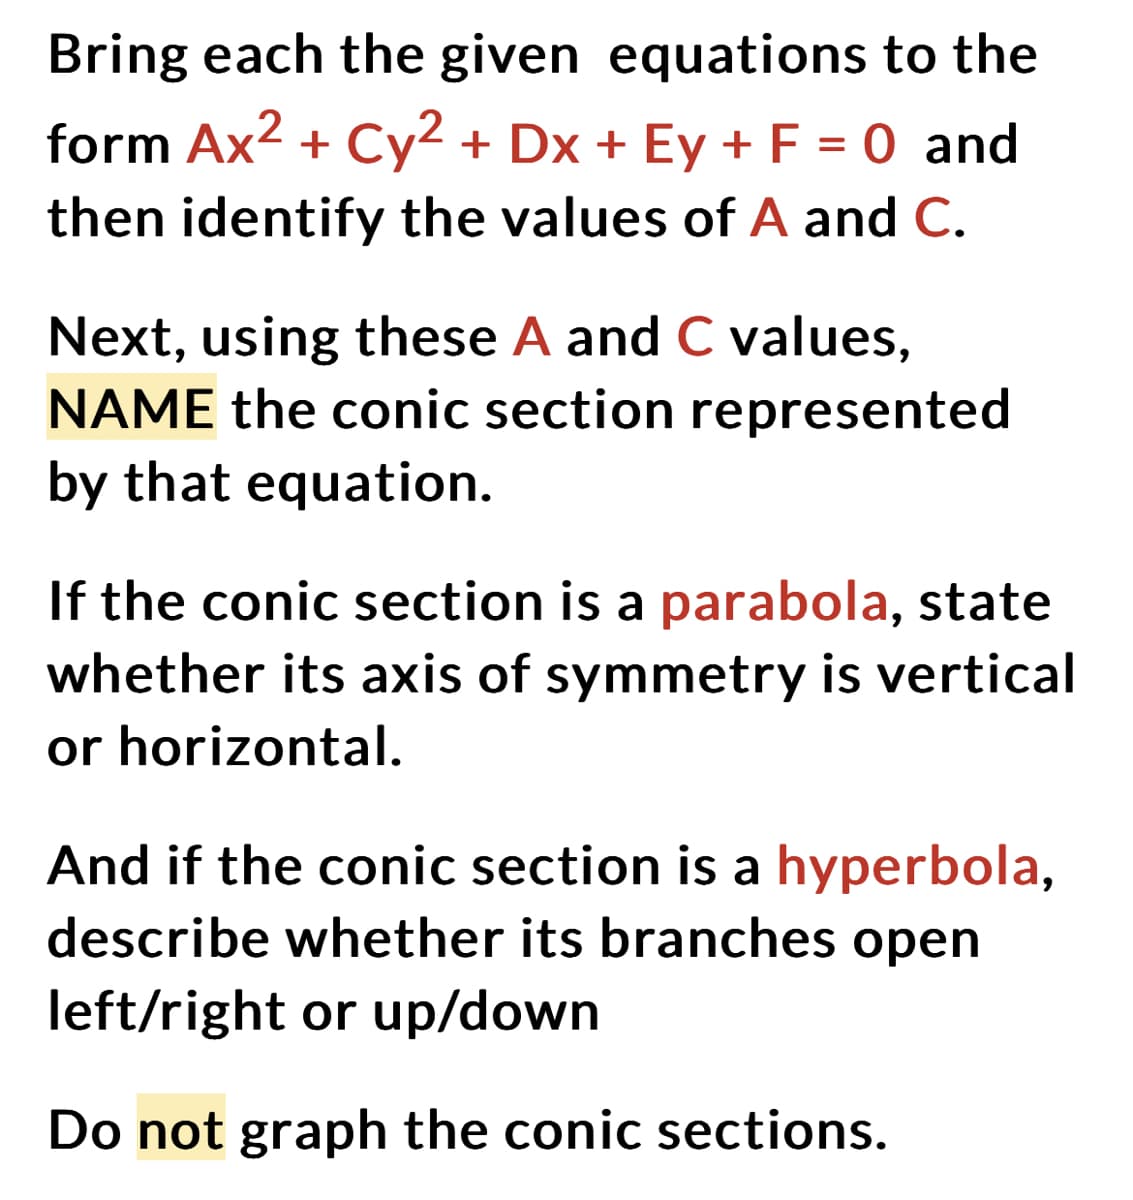 Bring each the given equations to the
form Ax² + Cy² + Dx + Ey + F = 0 and
then identify the values of A and C.
Next, using these A and C values,
NAME the conic section represented
by that equation.
If the conic section is a parabola, state
whether its axis of symmetry is vertical
or horizontal.
And if the conic section is a hyperbola,
describe whether its branches open
left/right or up/down
Do not graph the conic sections.